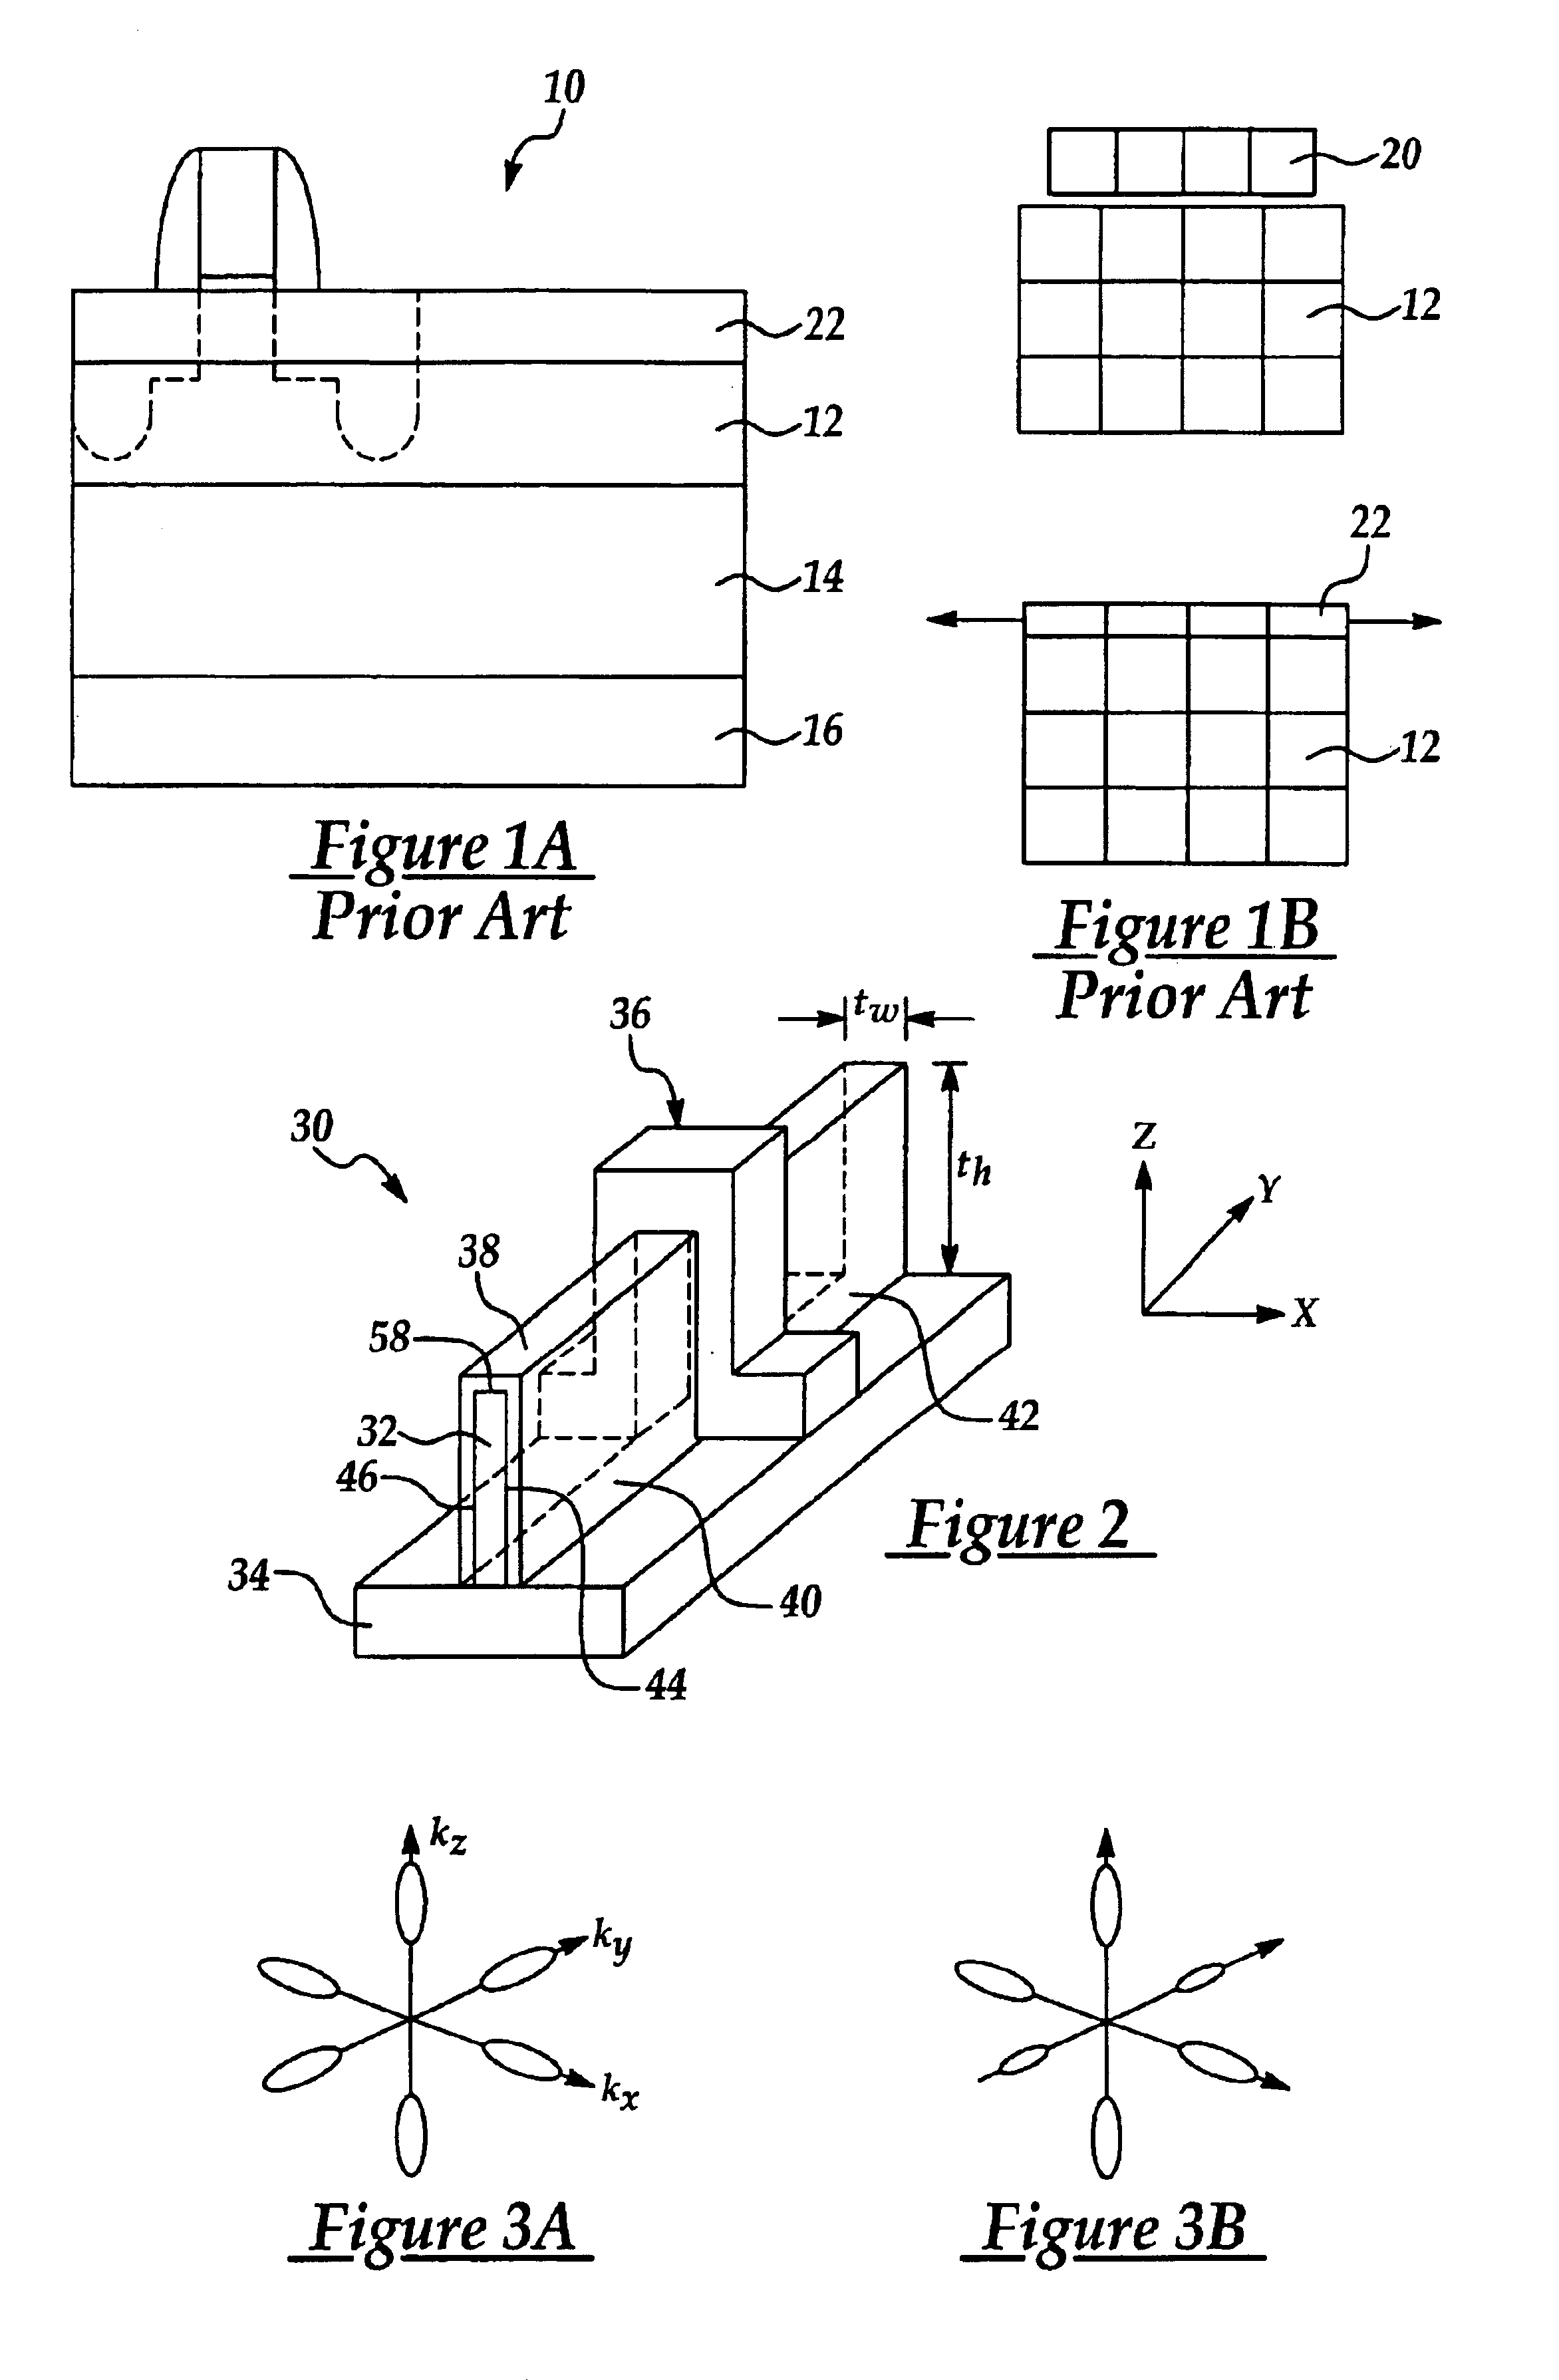 Strained-channel multiple-gate transistor